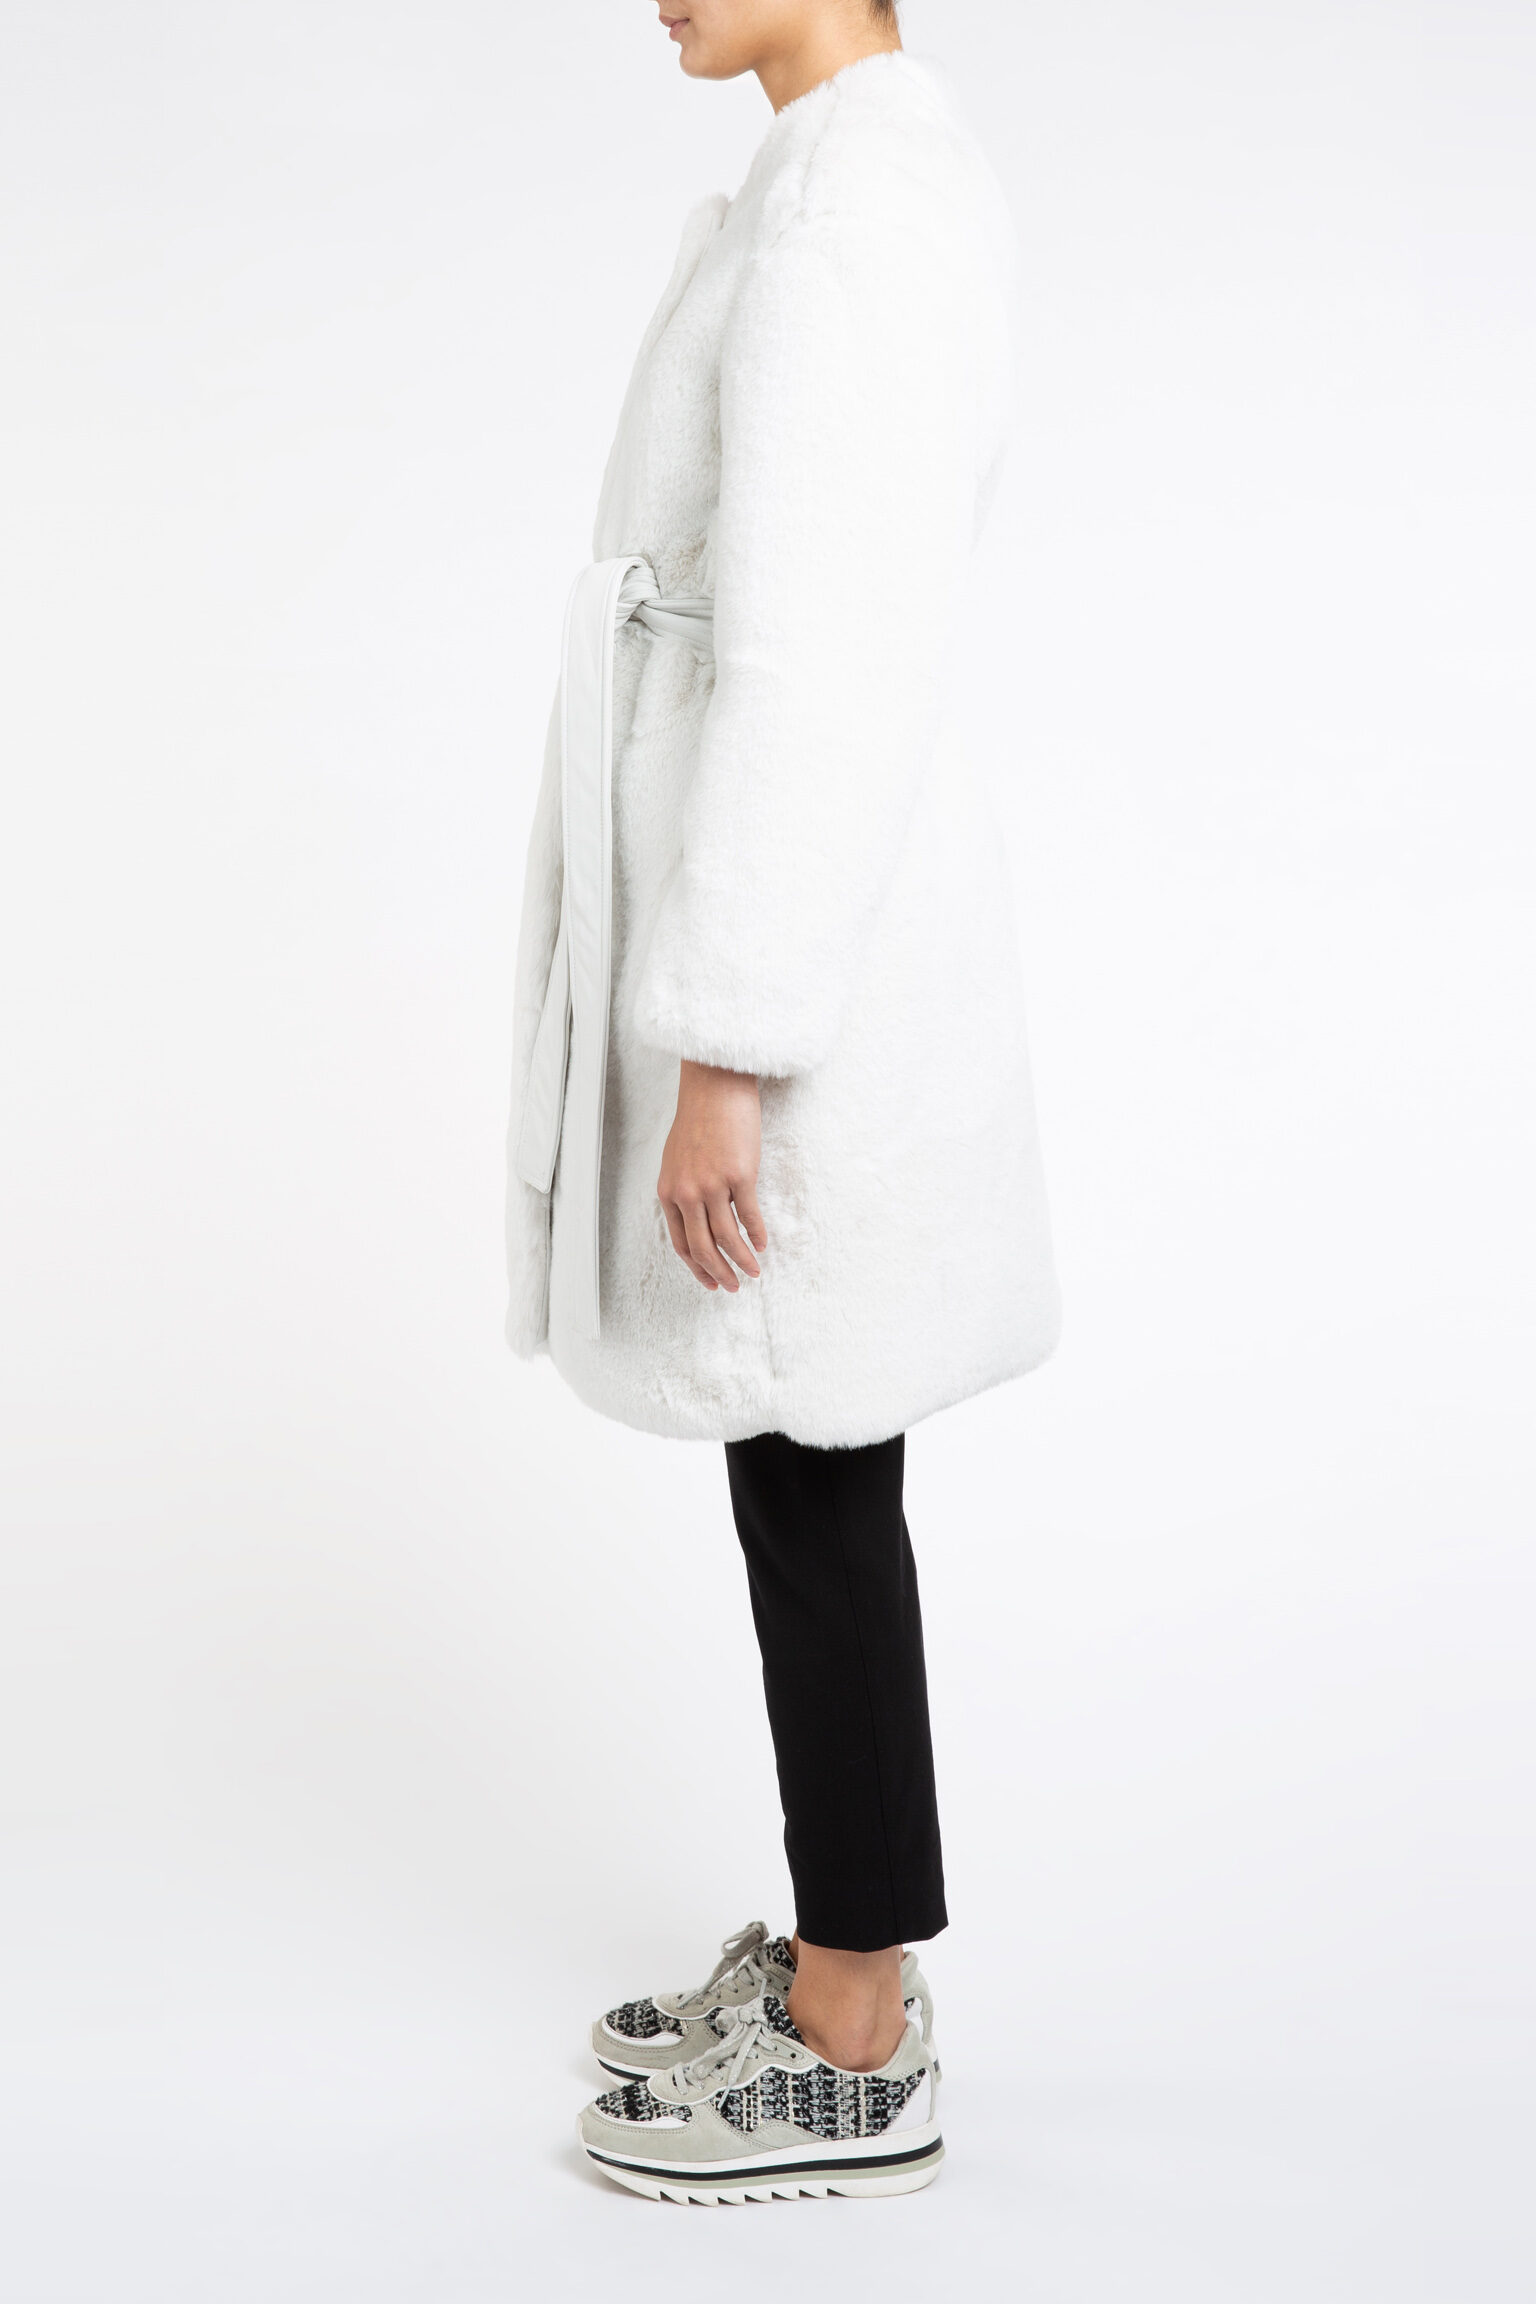 Serena Collarless Faux Fur Coat in White - SOLD OUT